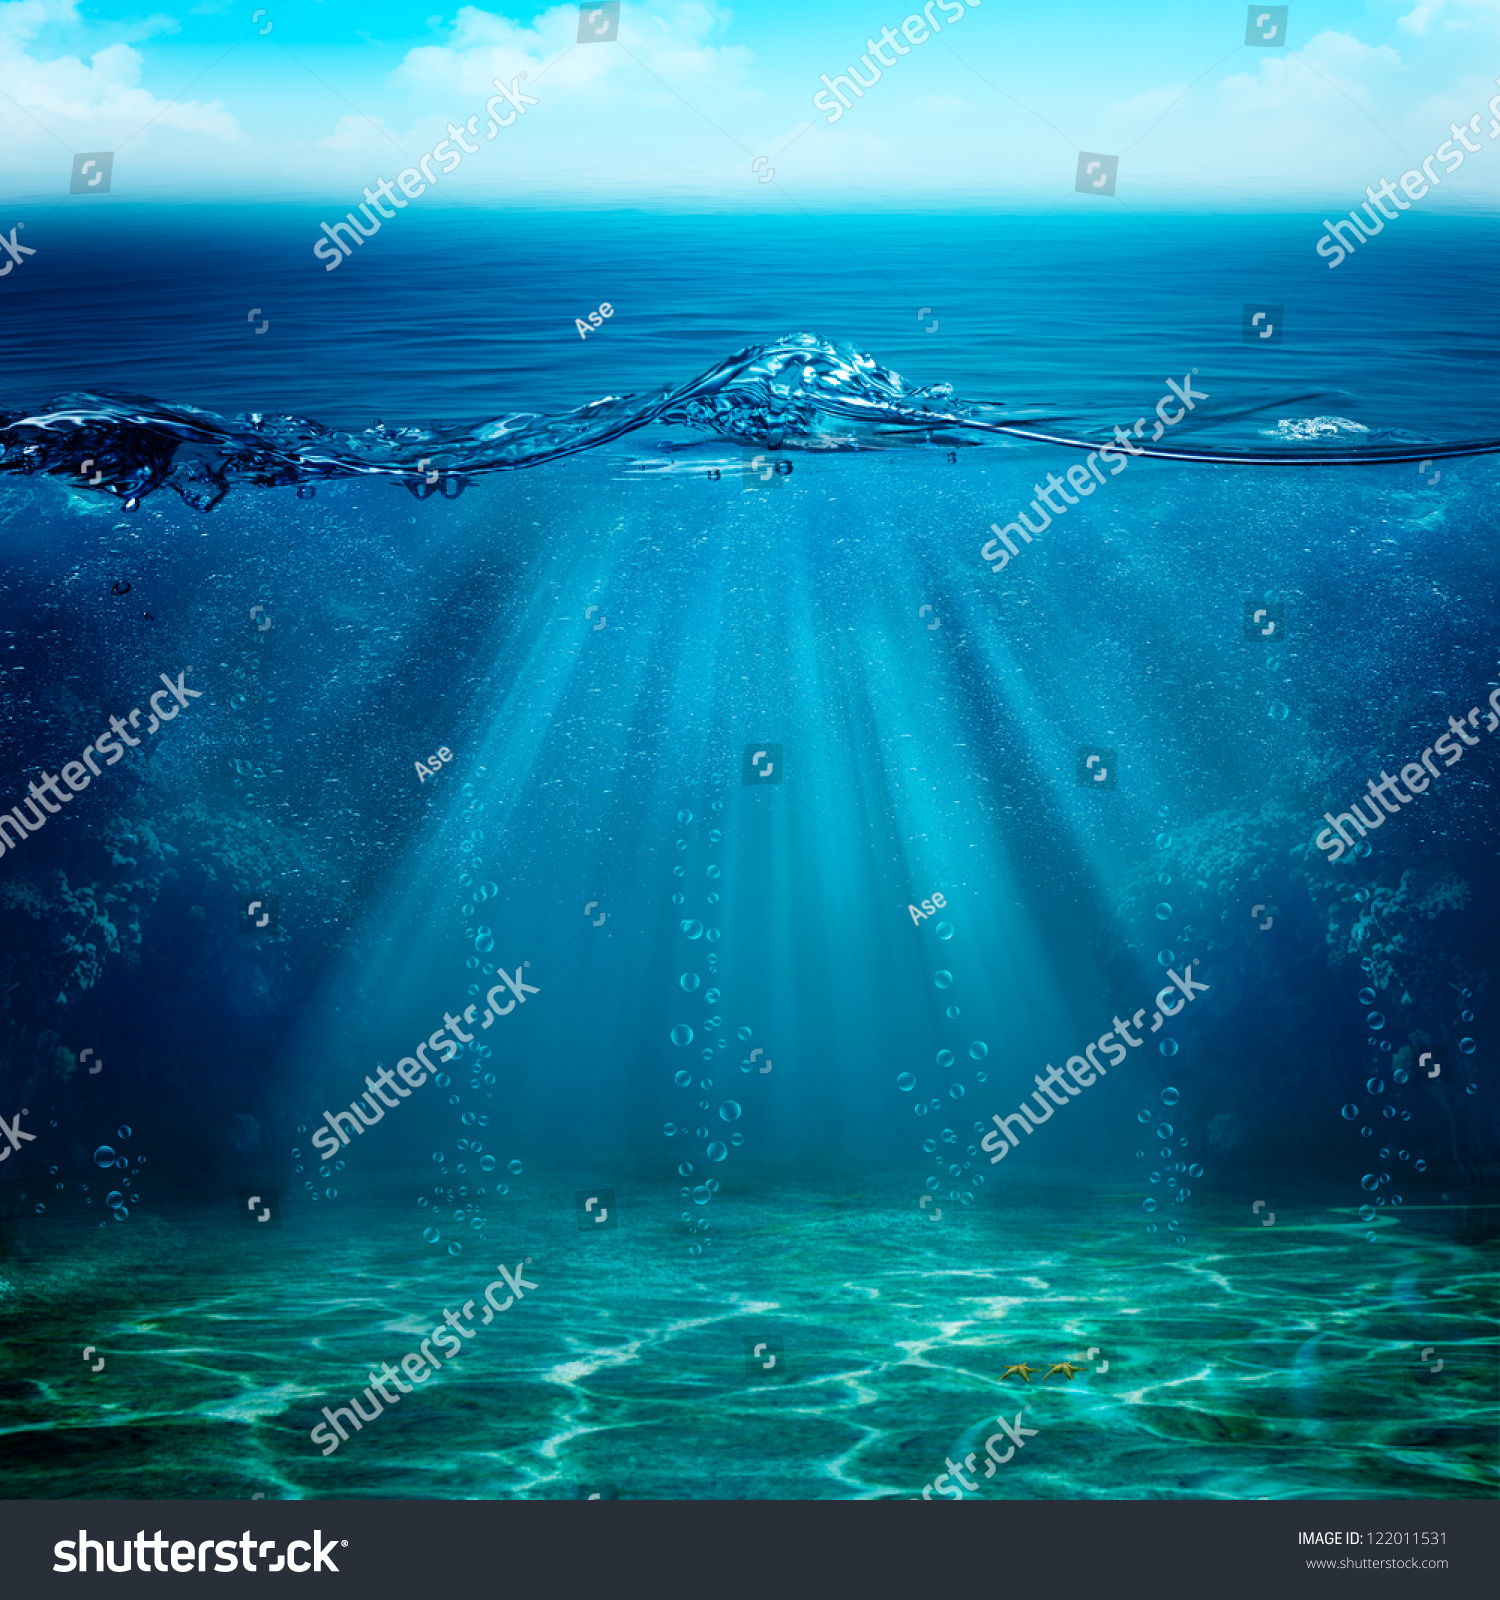 Abstract underwater backgrounds for your design #122011531